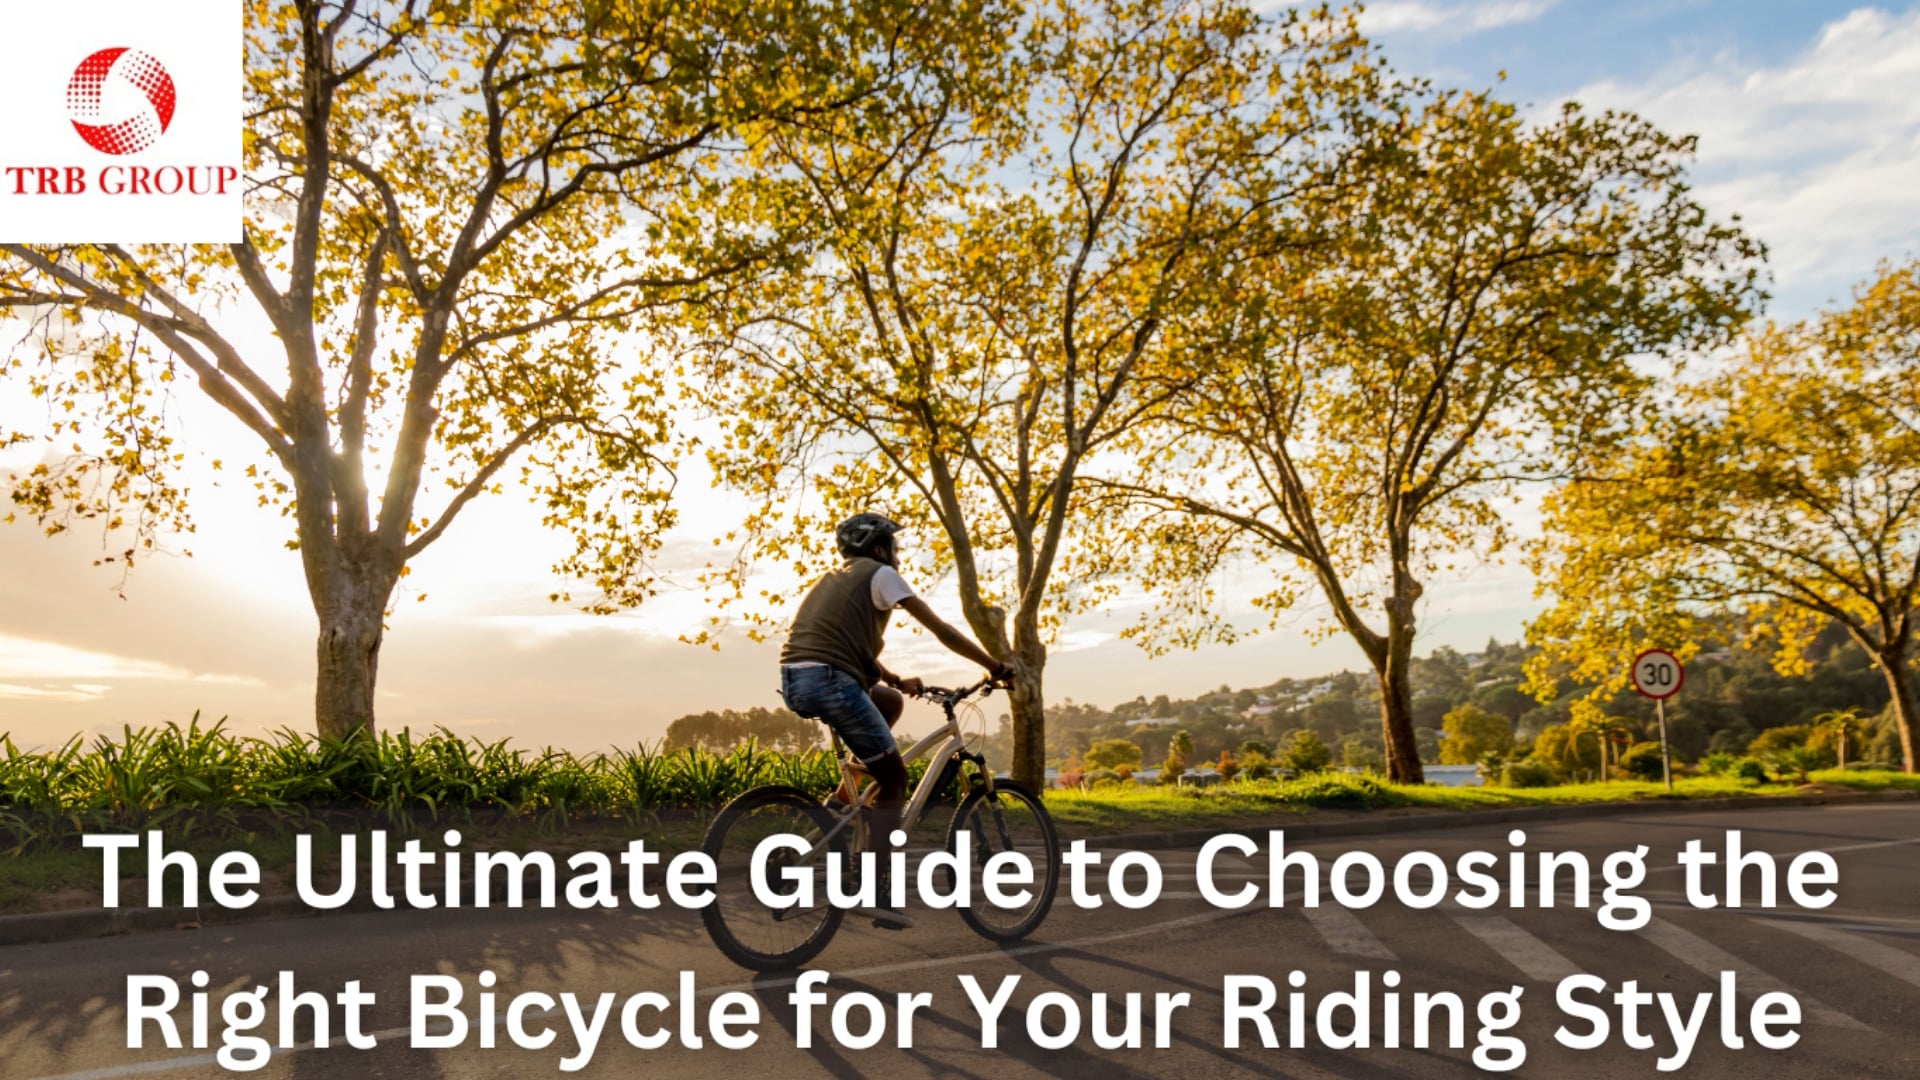 TRB GROUP: The Ultimate Guide to Choosing the Right Bicycle for Your Riding Style on Vimeo